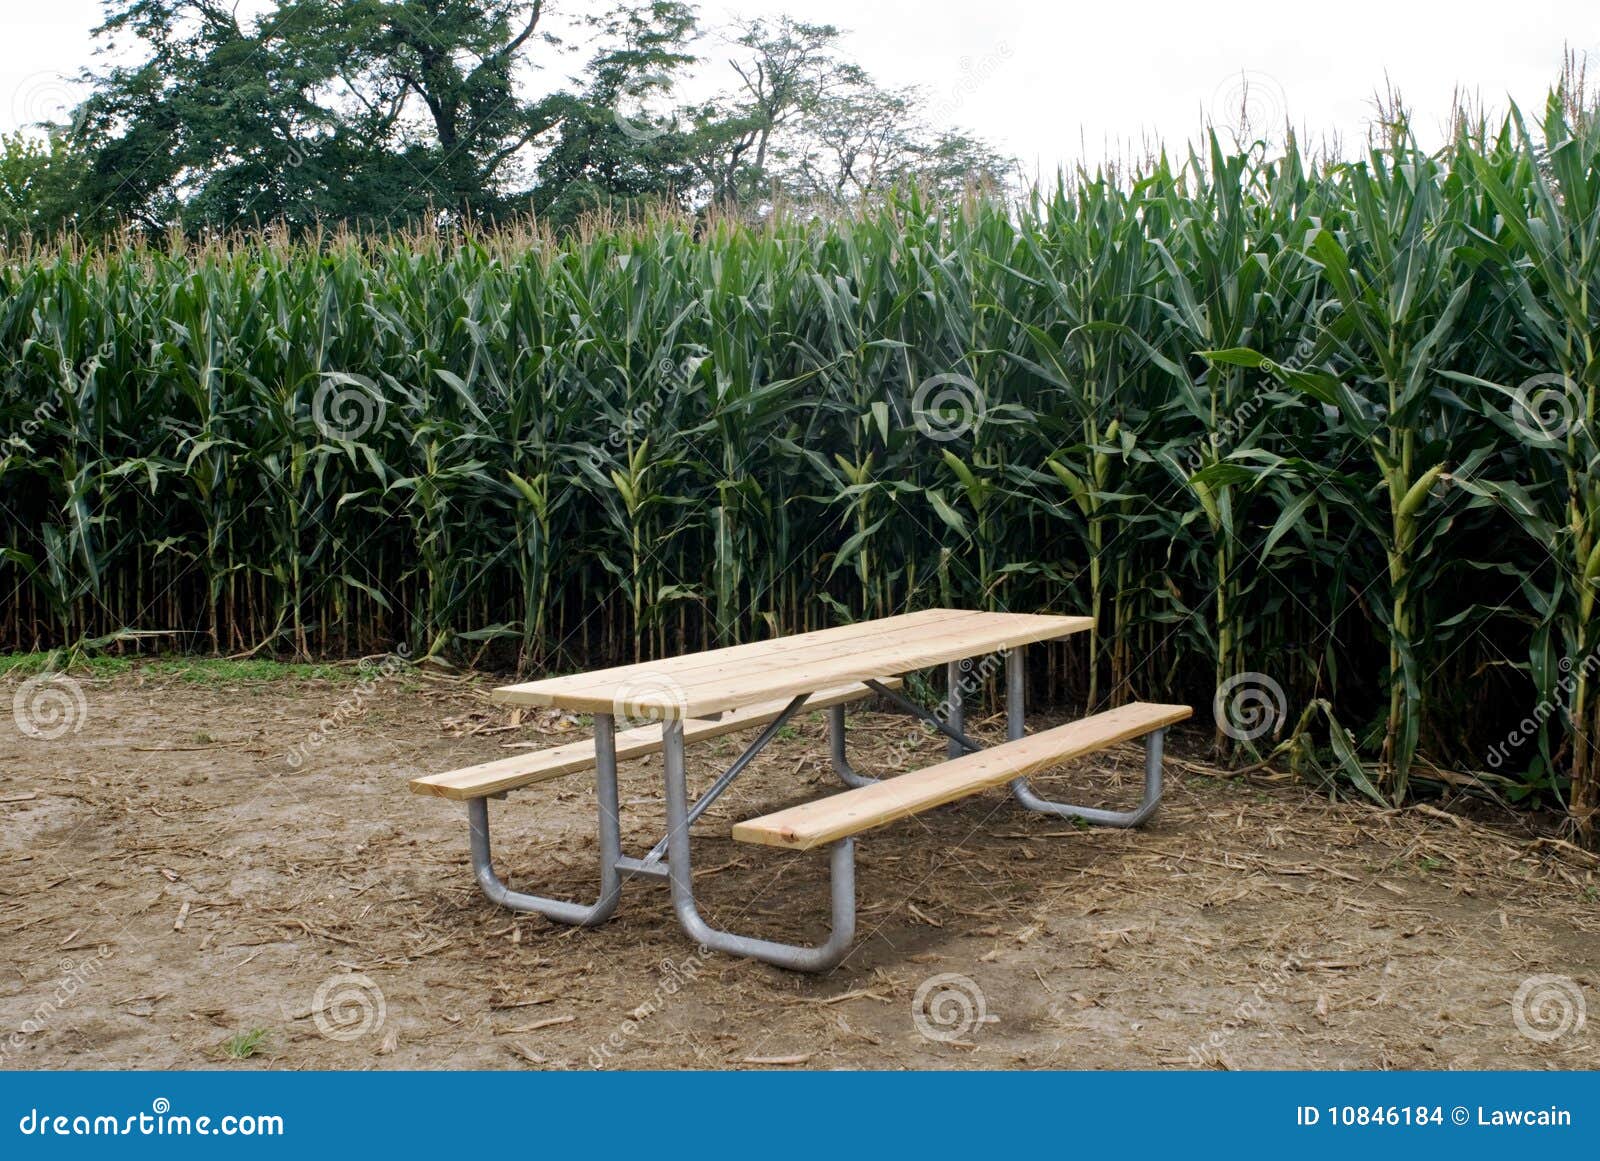 Rural setting of a cornfield with a picnic table in clearing.